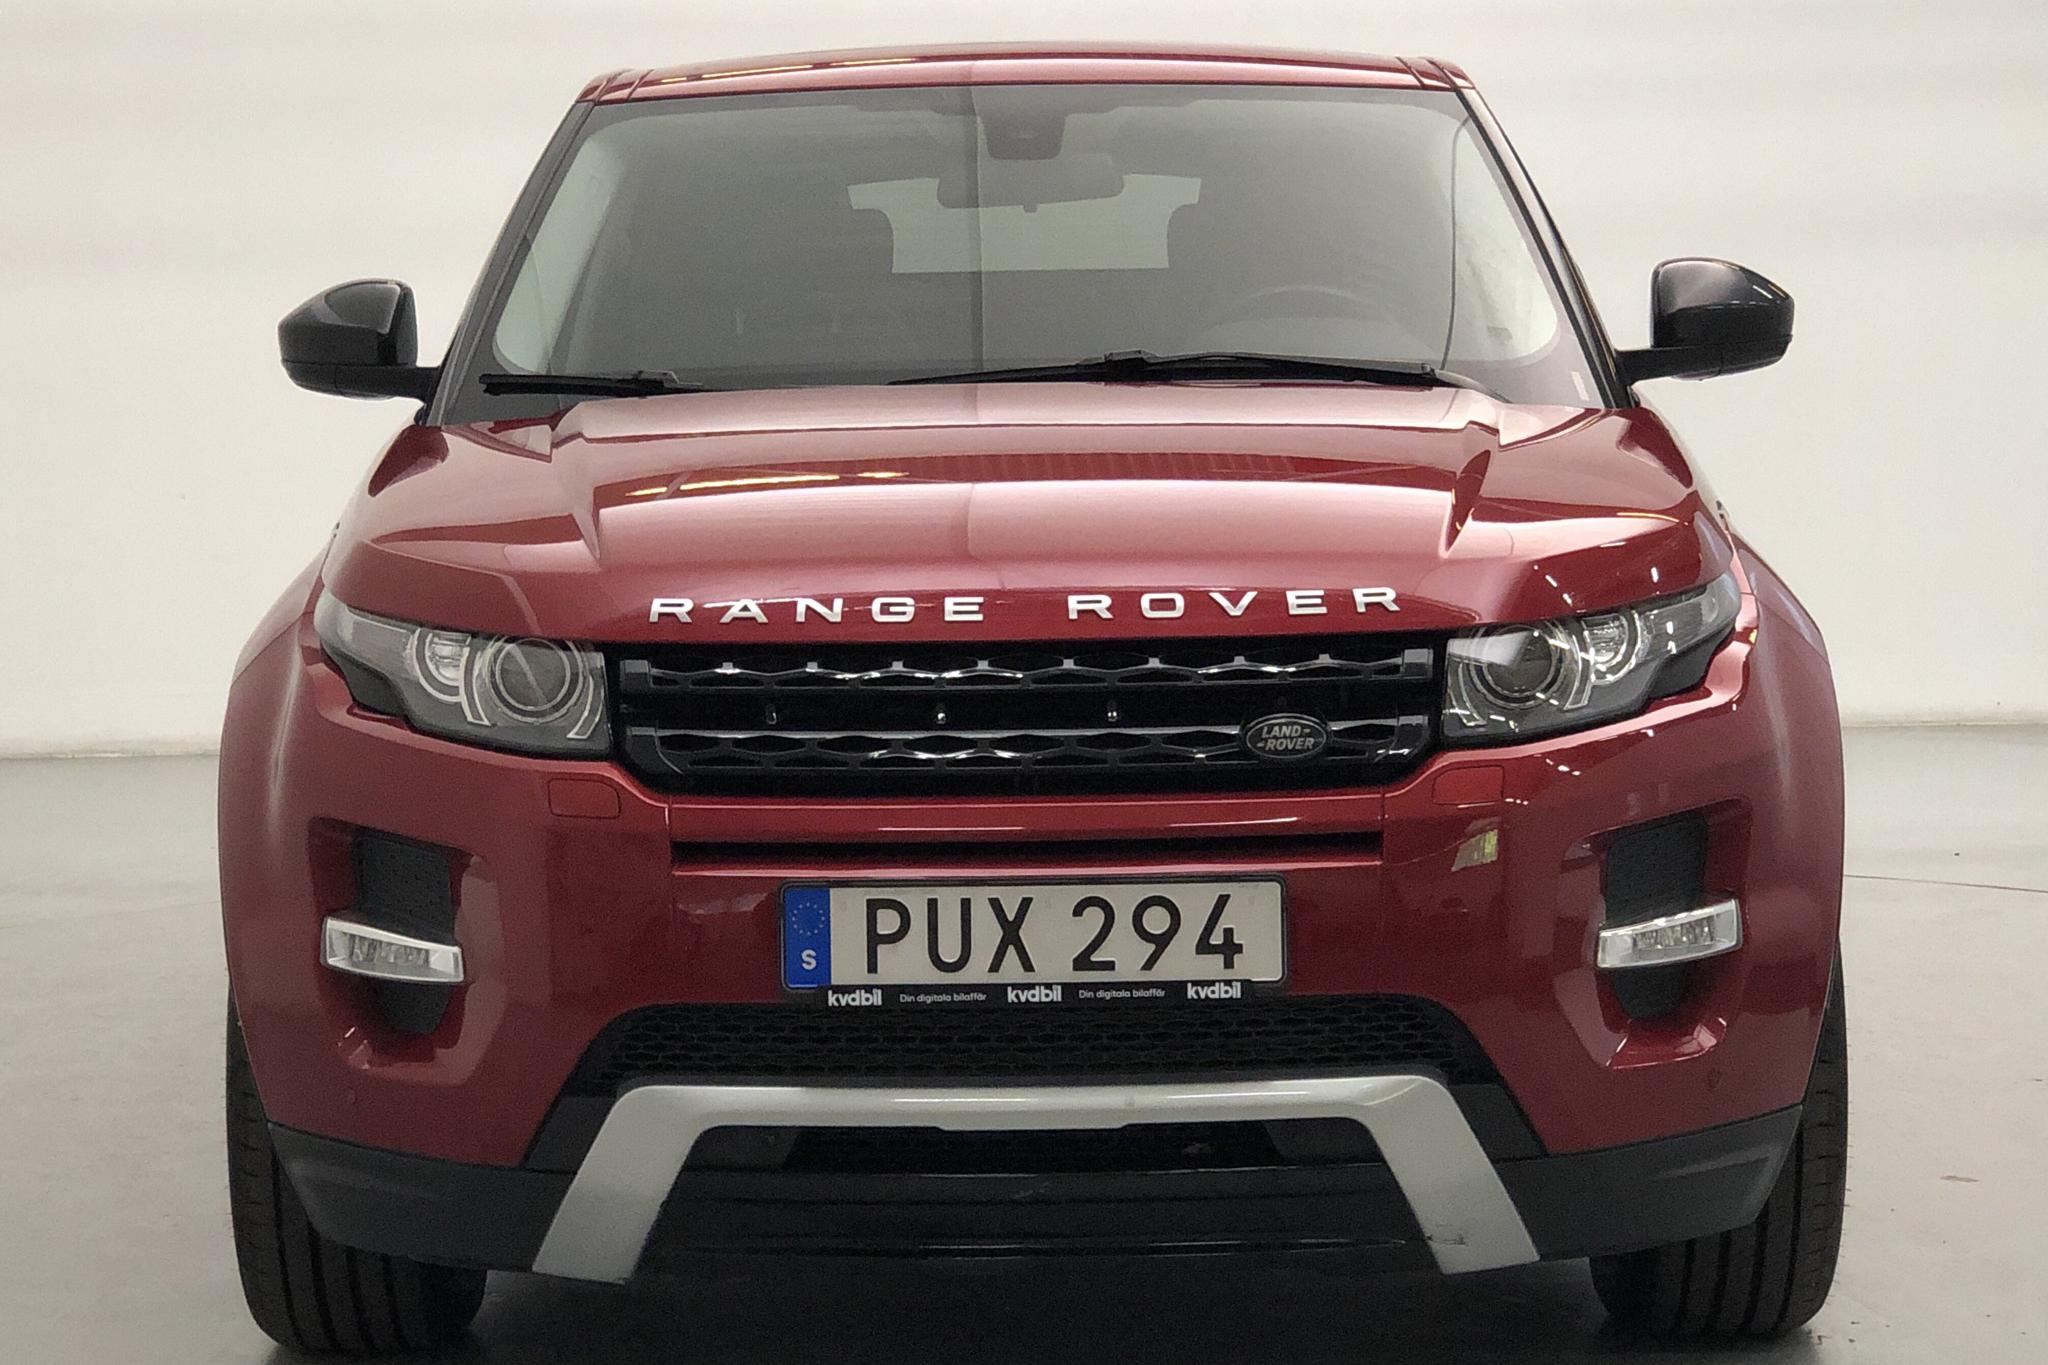 Land Rover Range Rover Evoque 2.2 SD4 5dr (190hk) - 95 380 km - Automatic - red - 2015